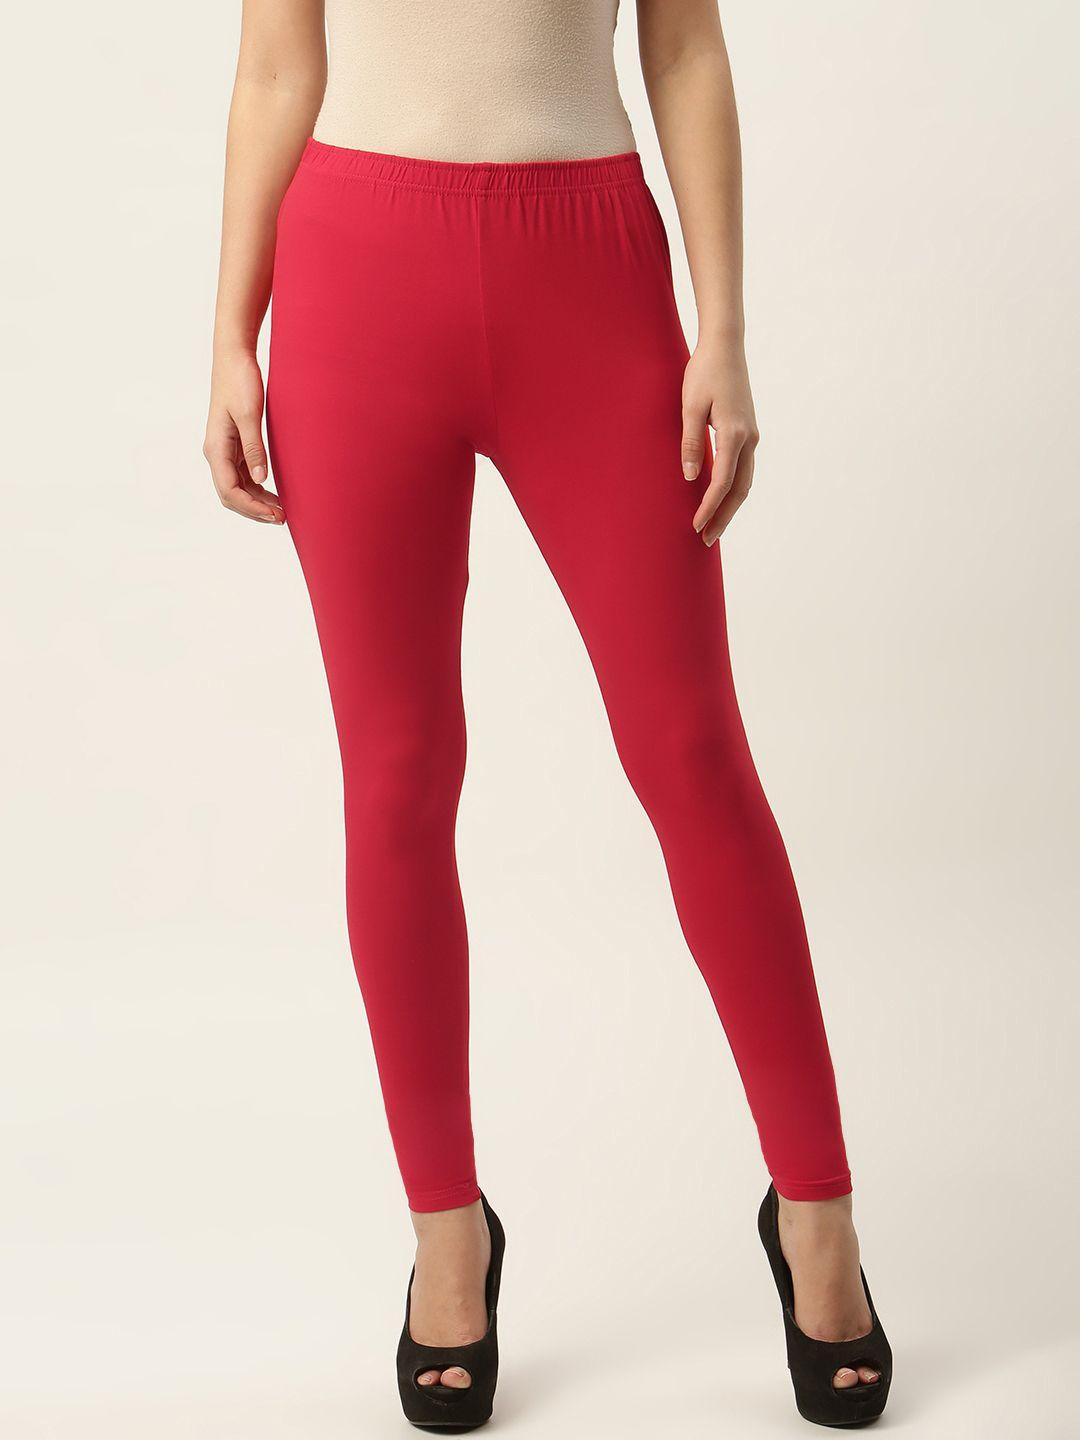 ms.lingies women red solid ankle-length leggings